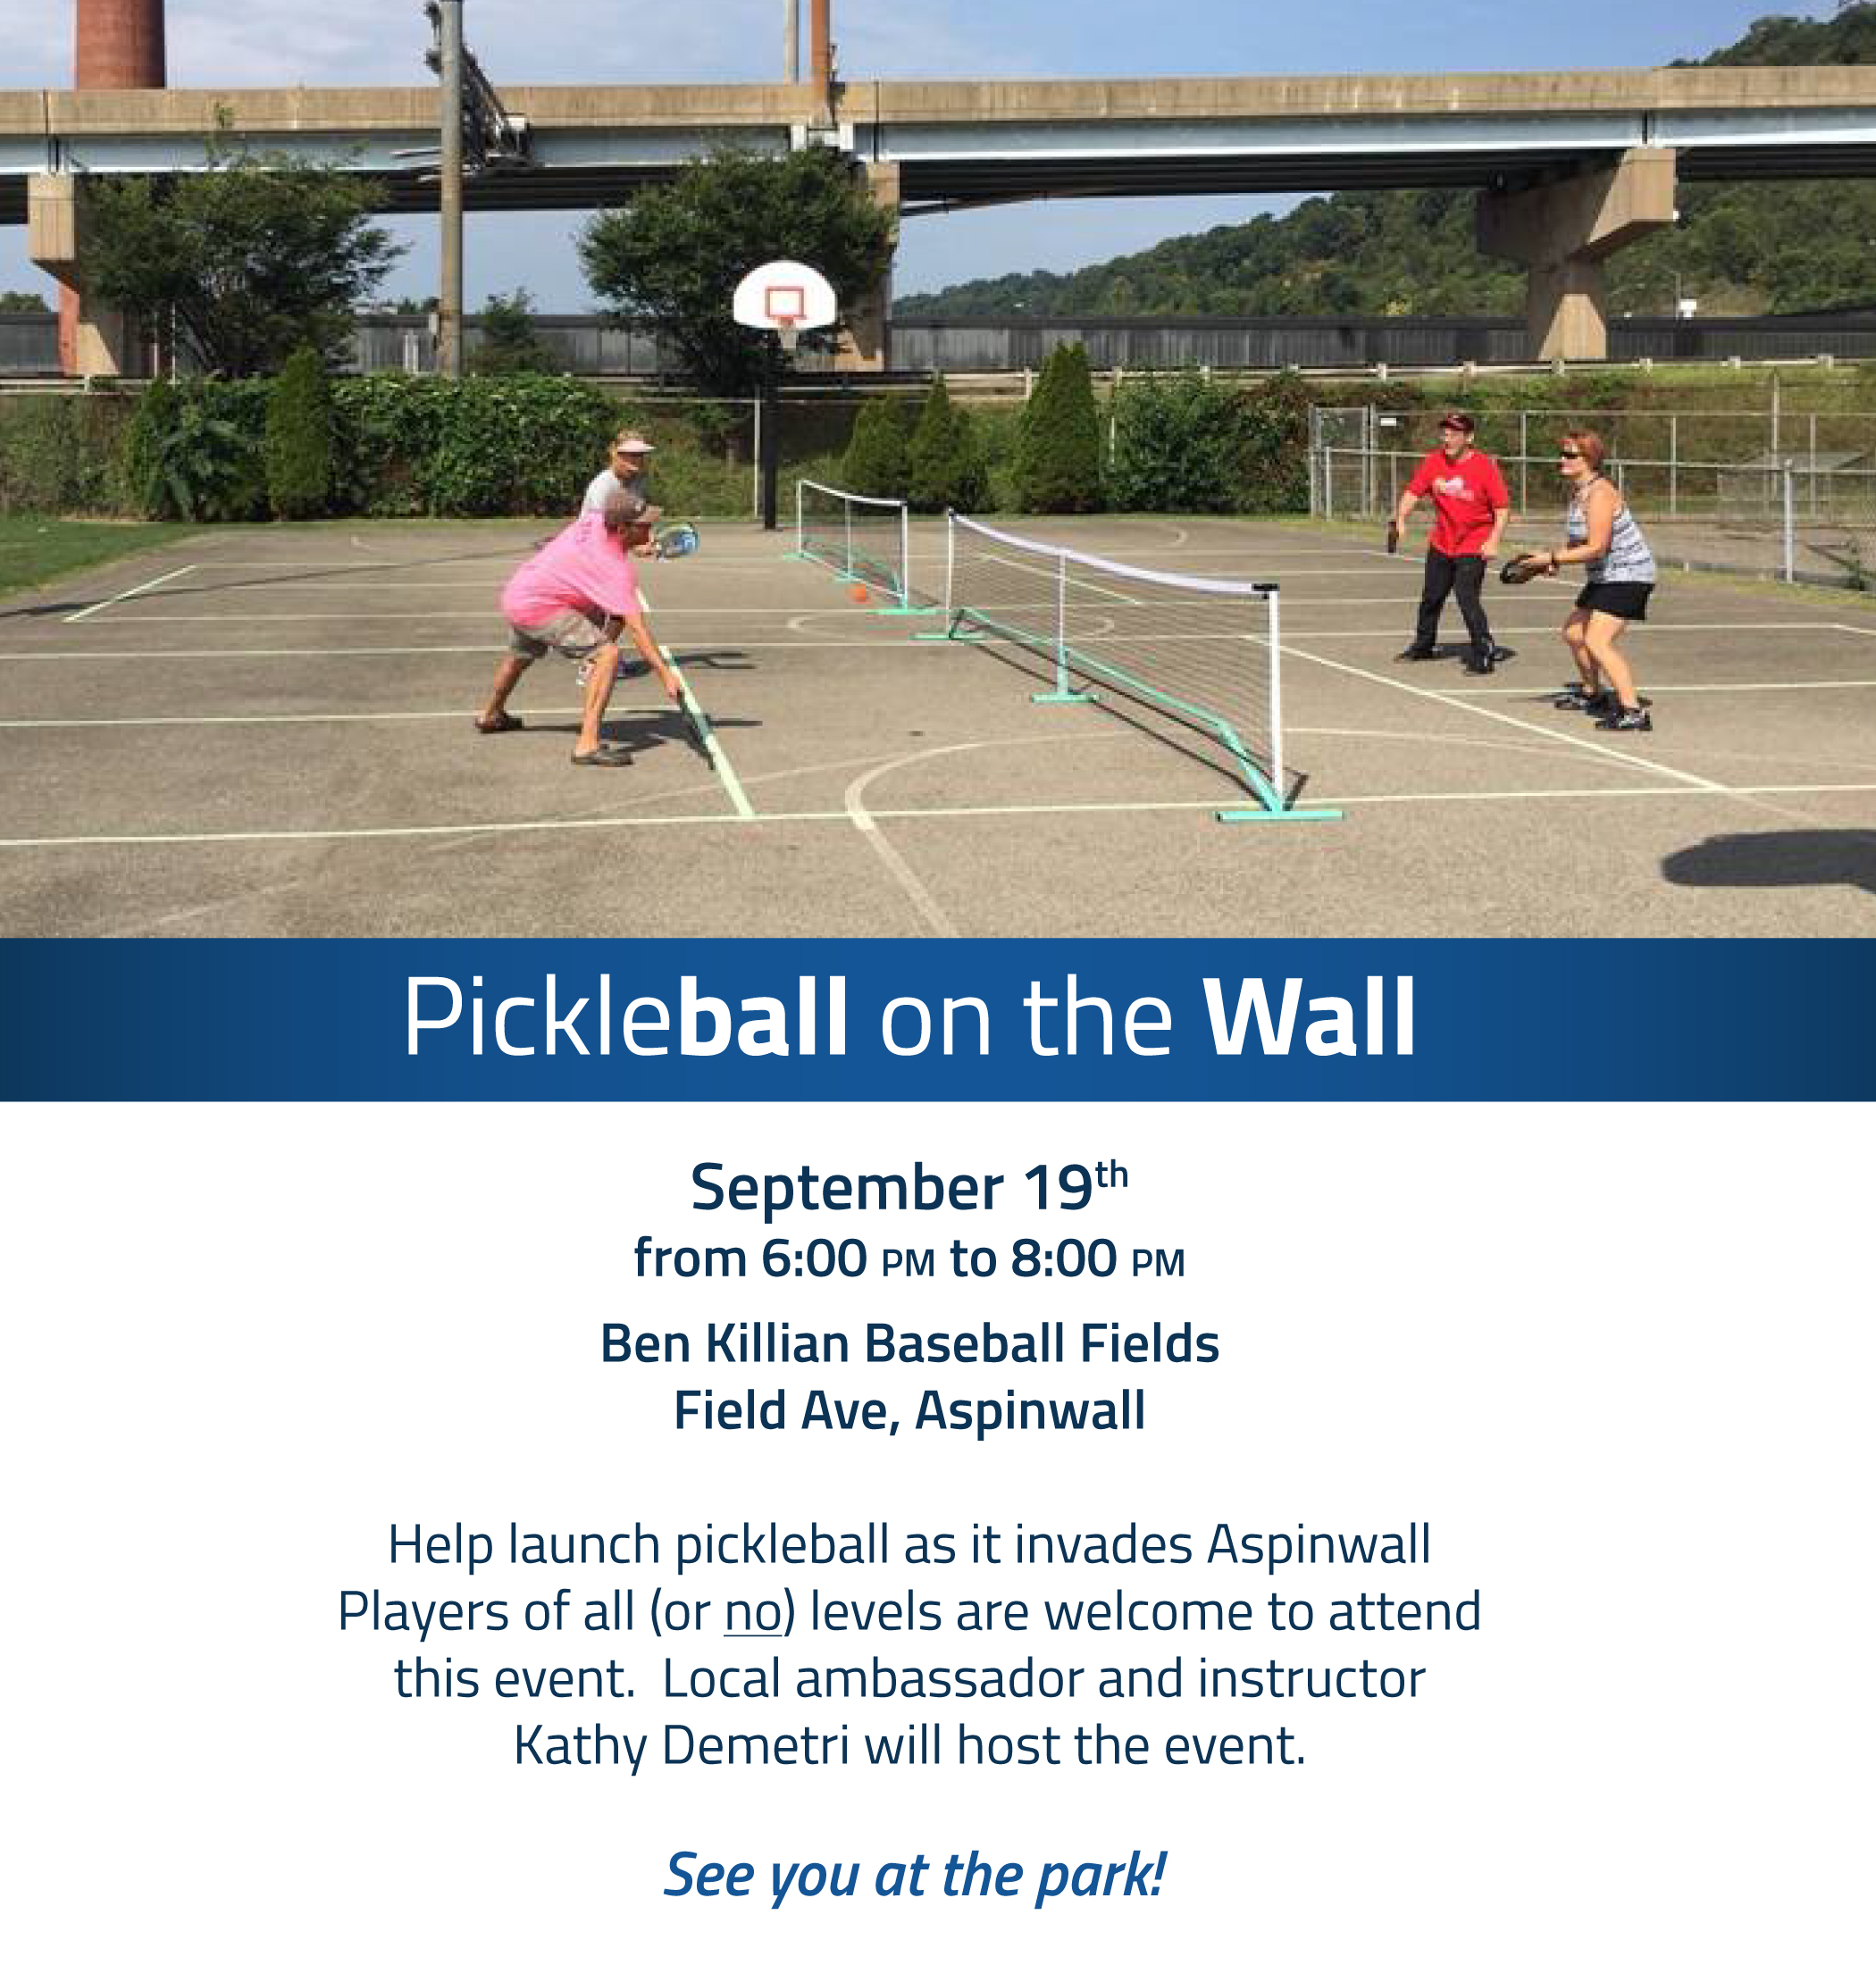 Pickleball on the Wall